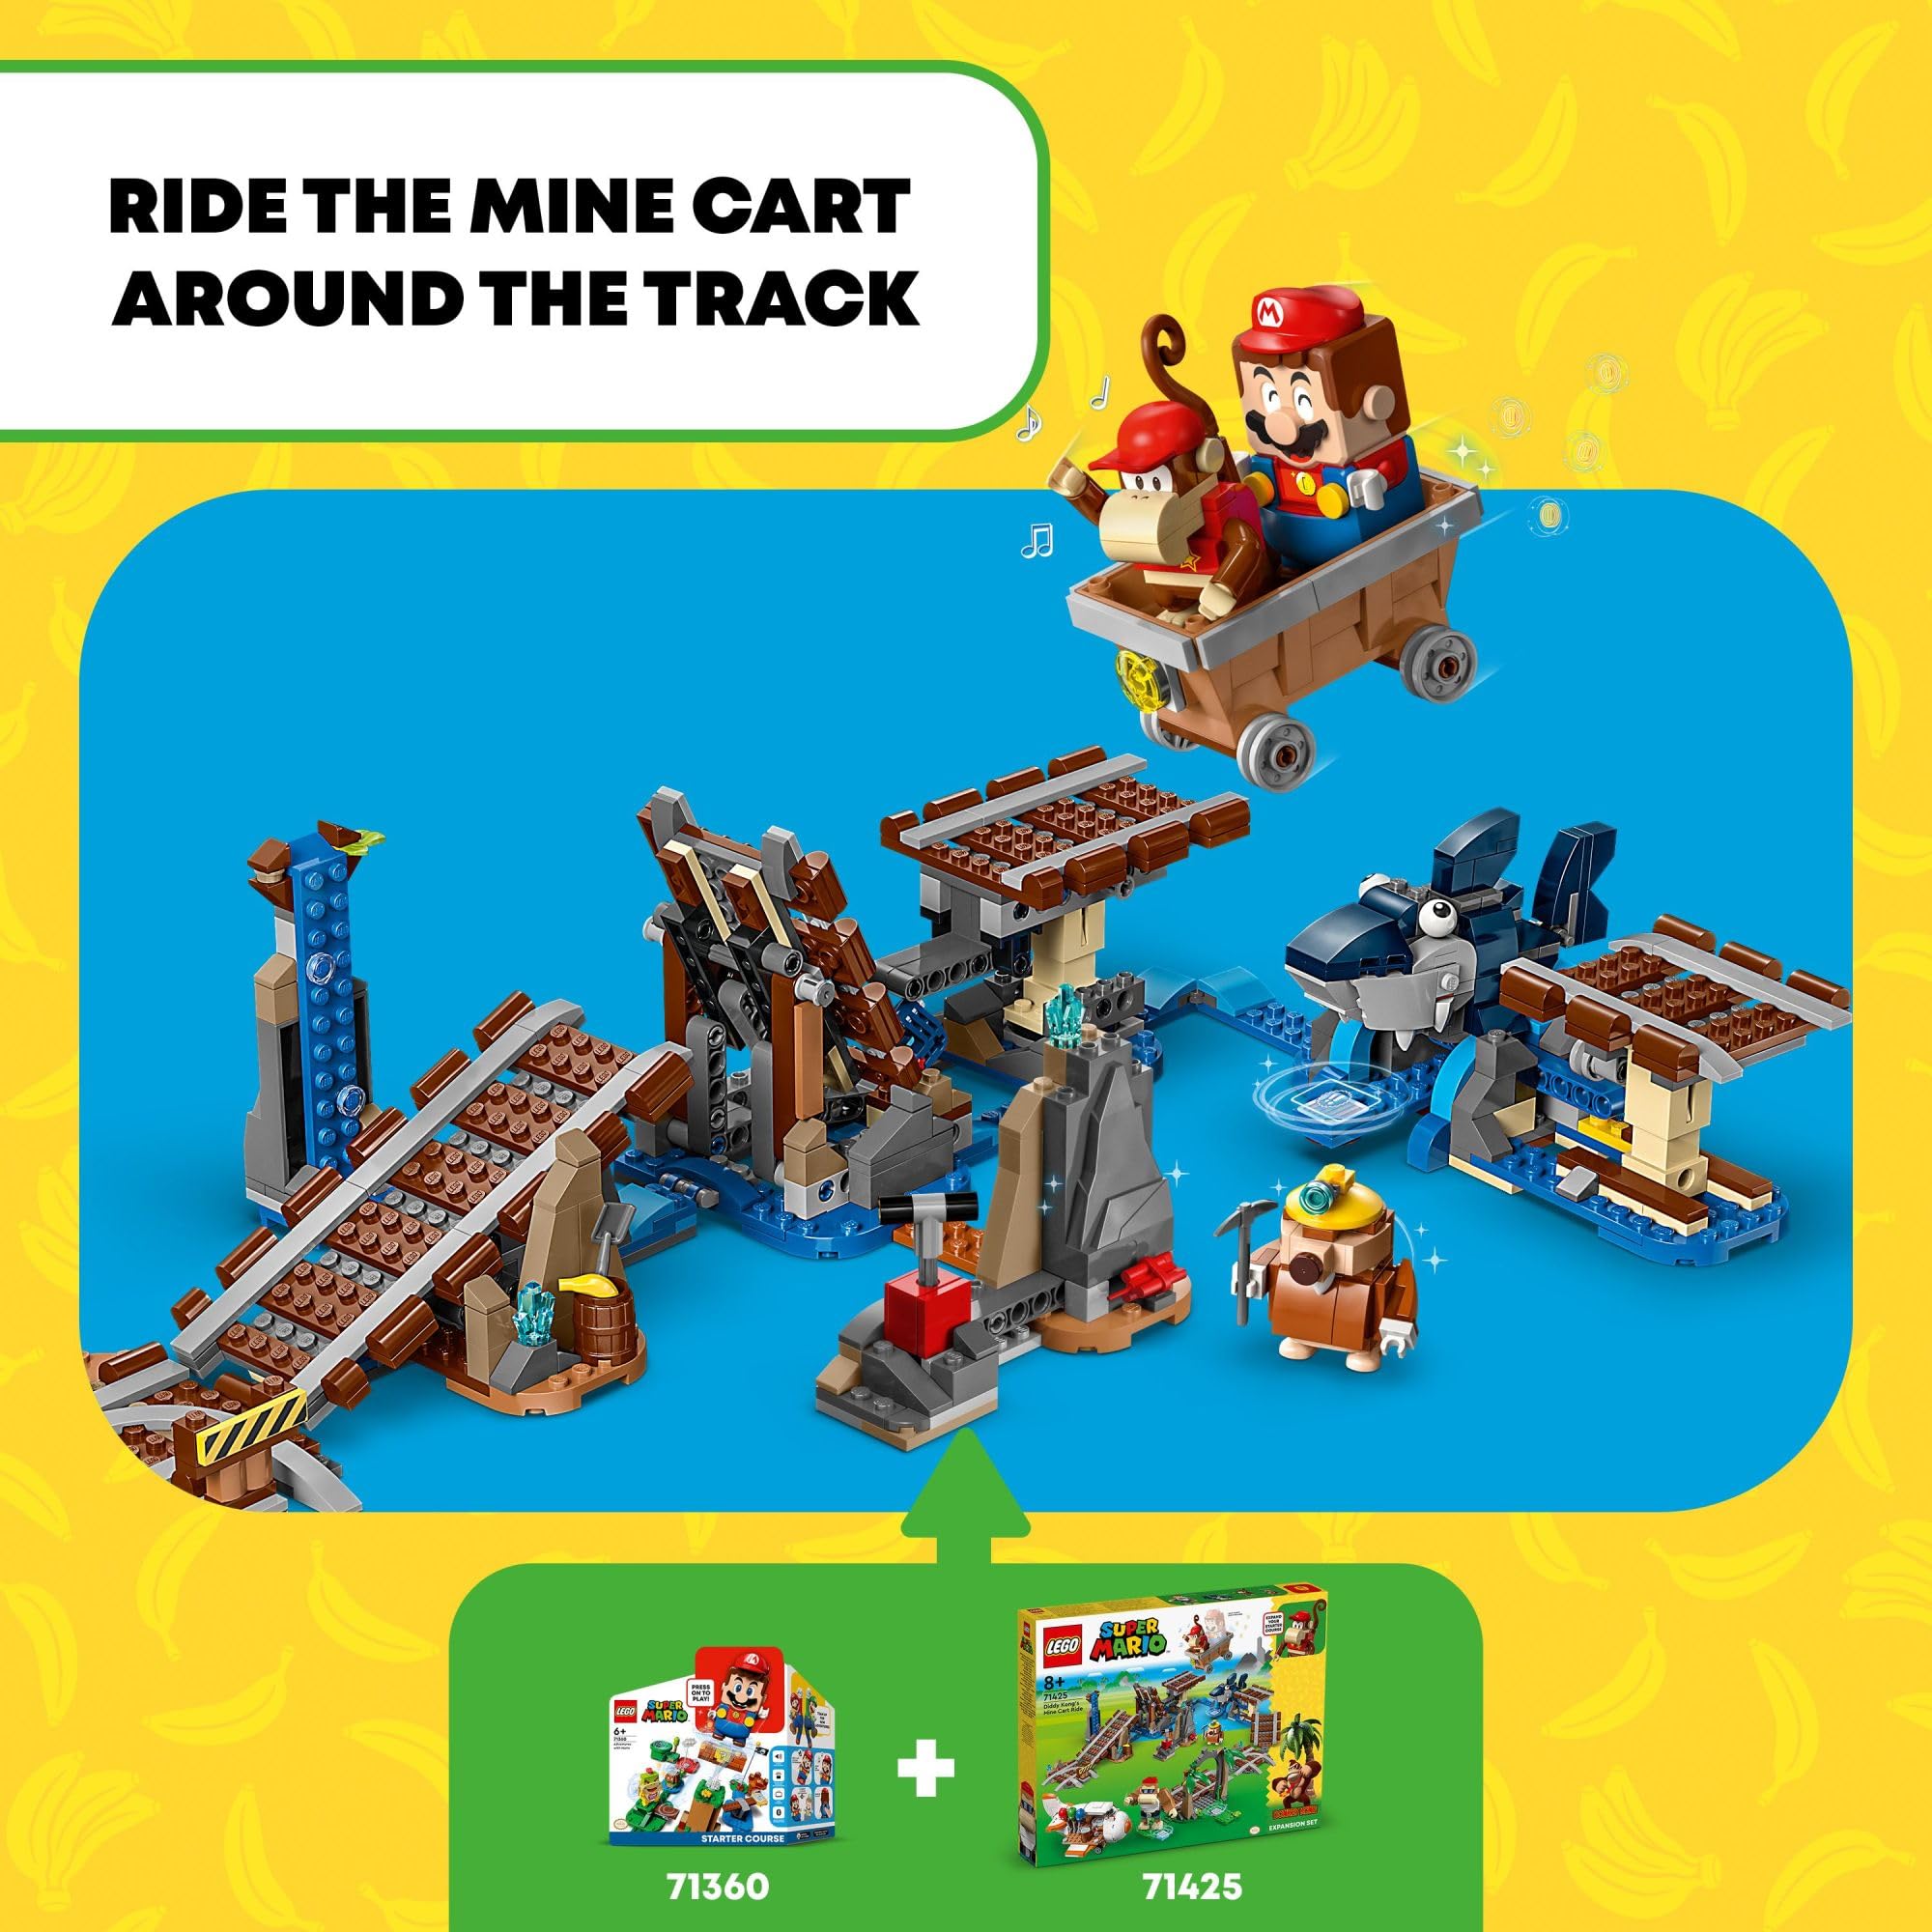 LEGO Super Mario Diddy Kong's Mine Cart Ride Expansion Set 71425, Collectible Building Toy with Brick Built Funky Kong Figure, Super Mario Gift Set for Kids Ages 8-10 to Combine with a Starter Course